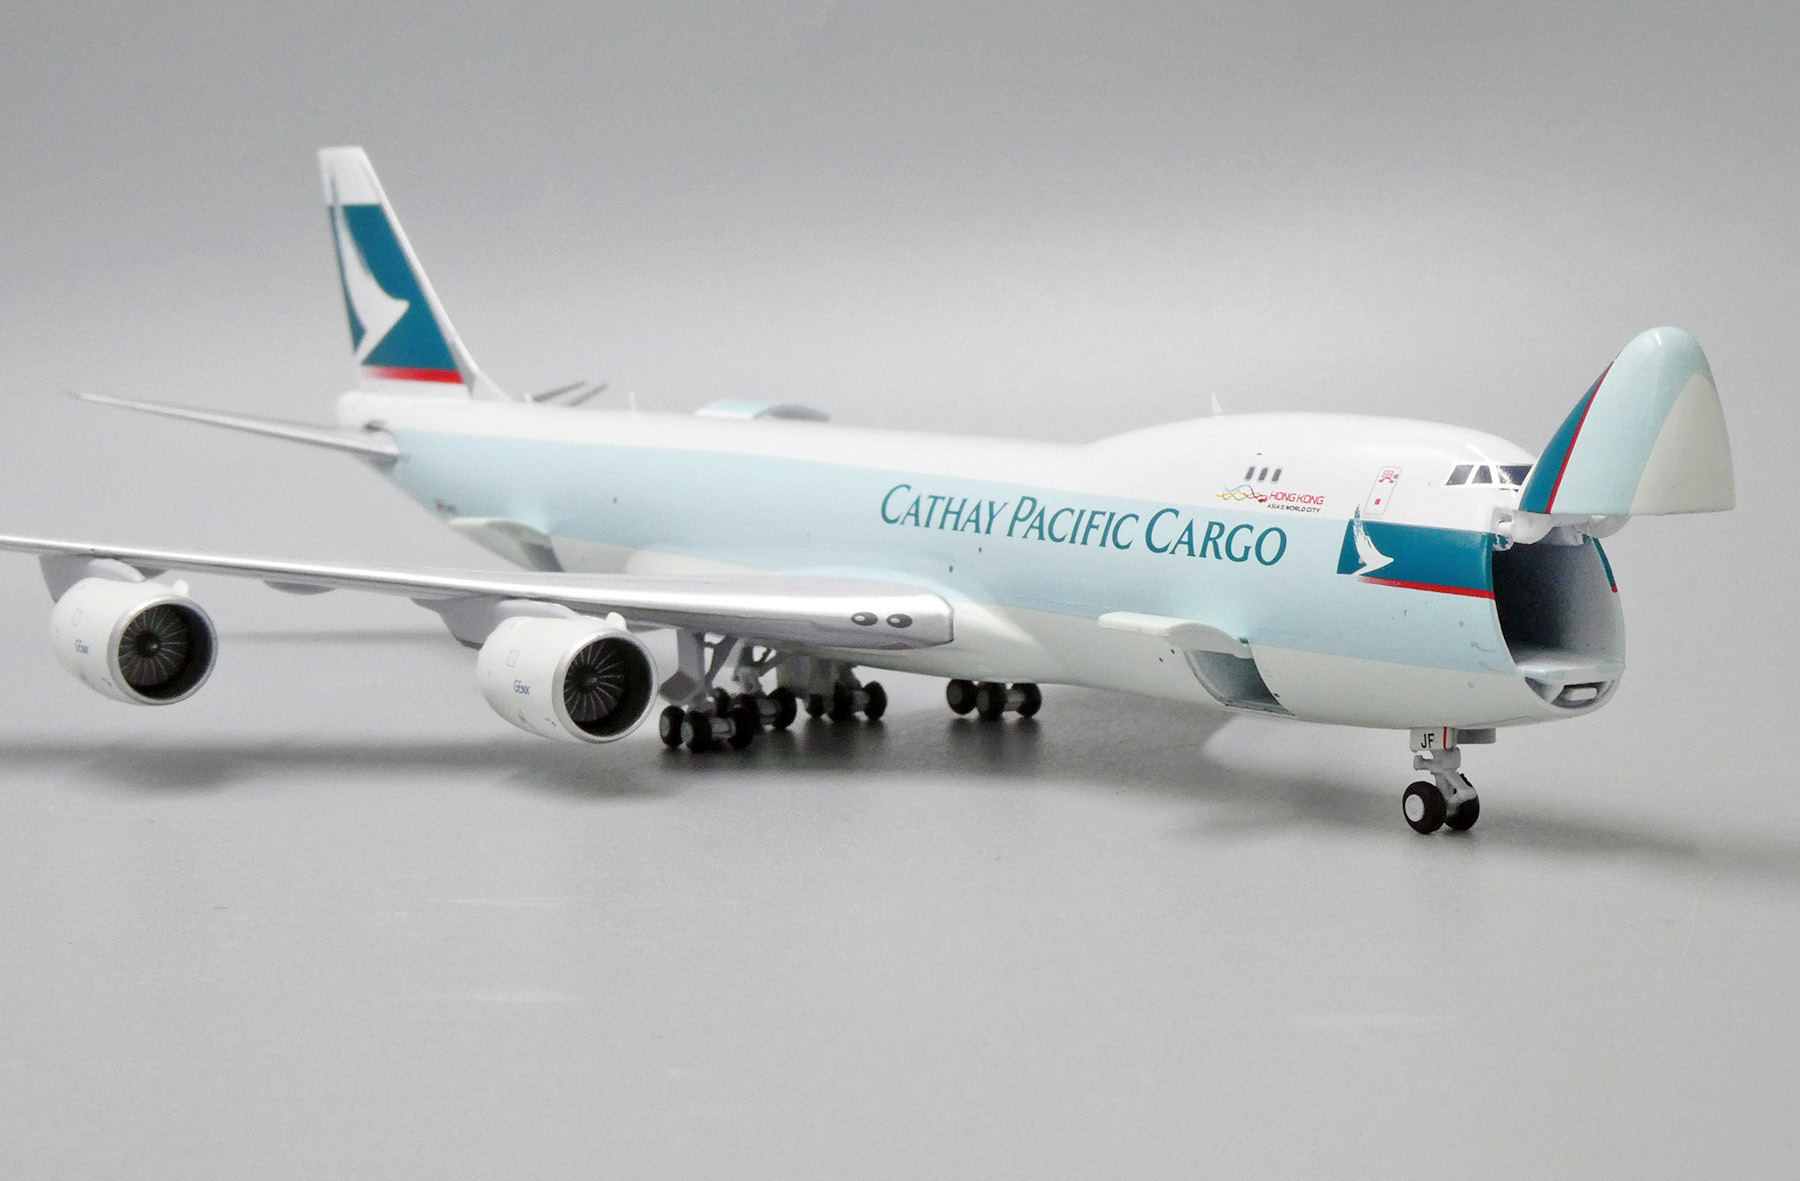 Boeing 747-8F 1/144 Cathay Pacific Cargo decal by Ascensio 748F-001 